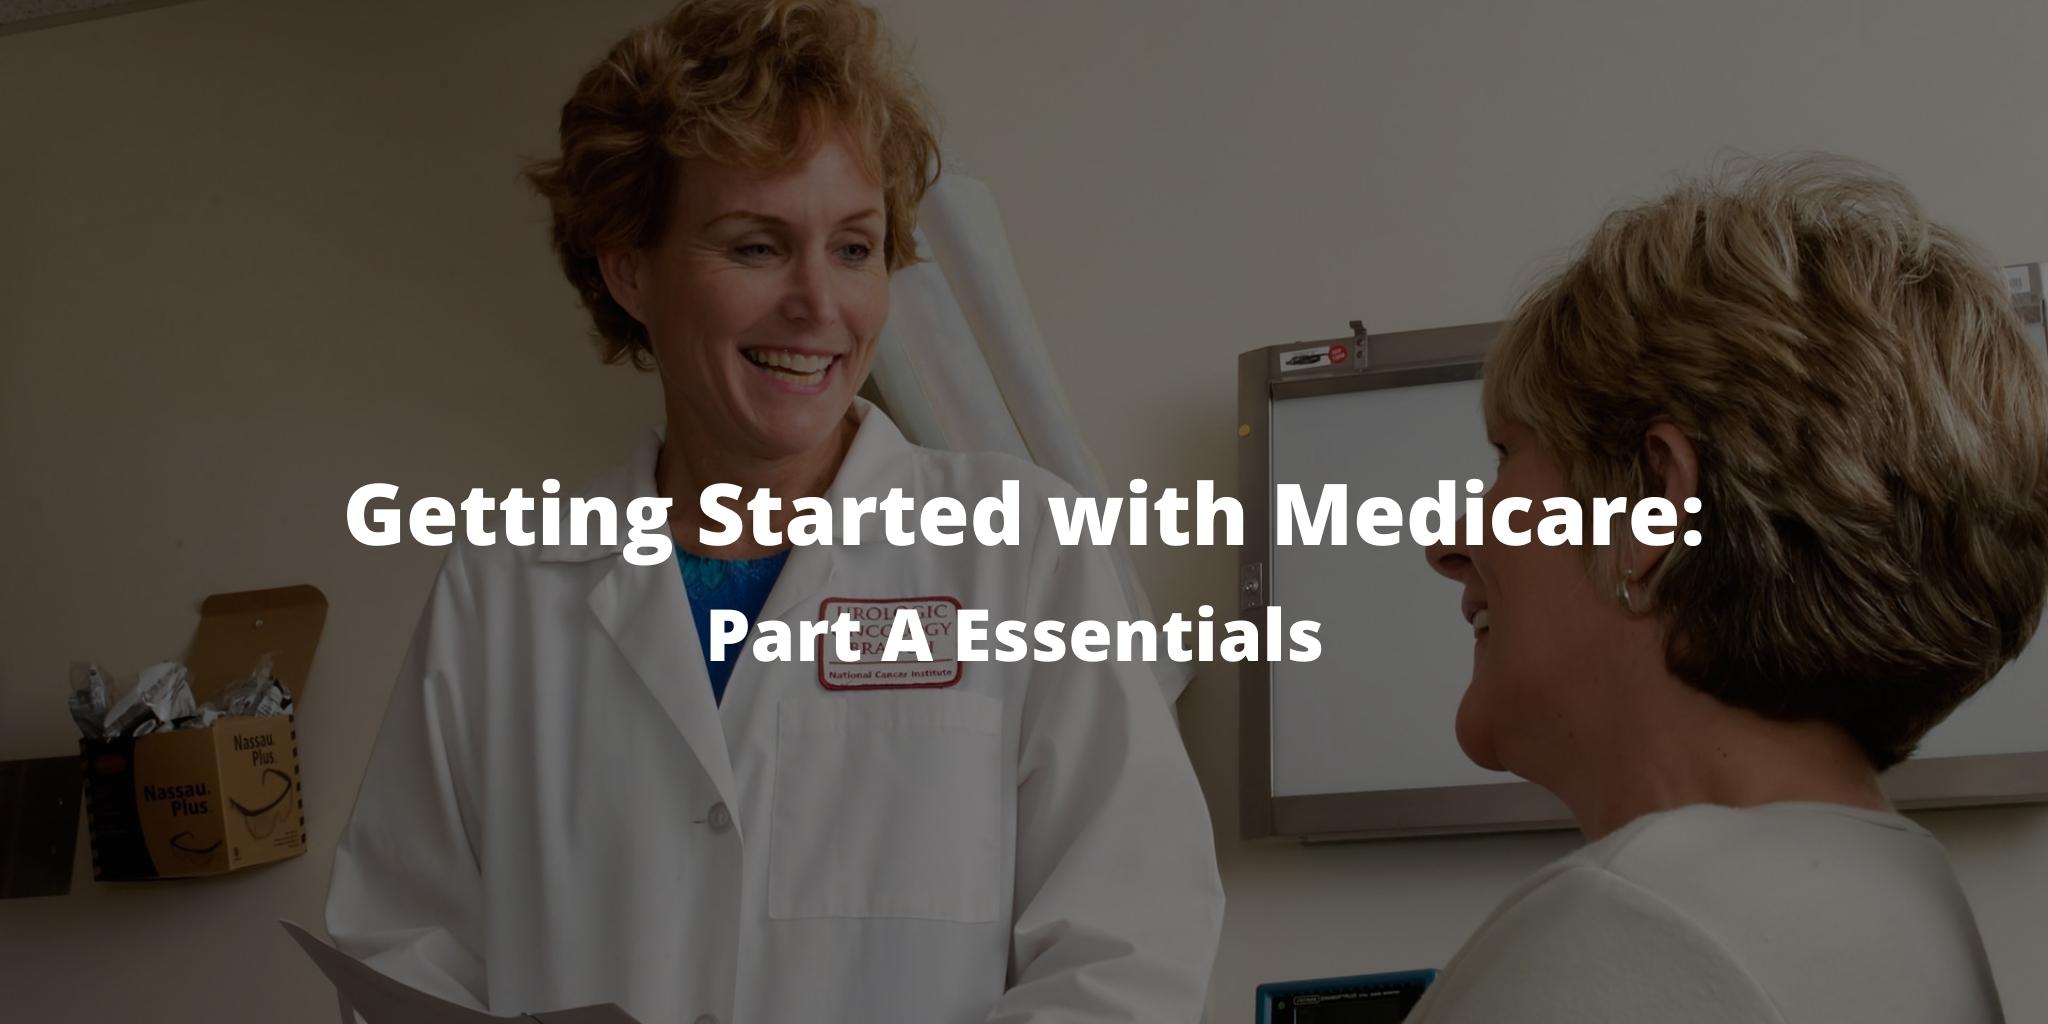 Getting started with Medicare: Part A Essentials